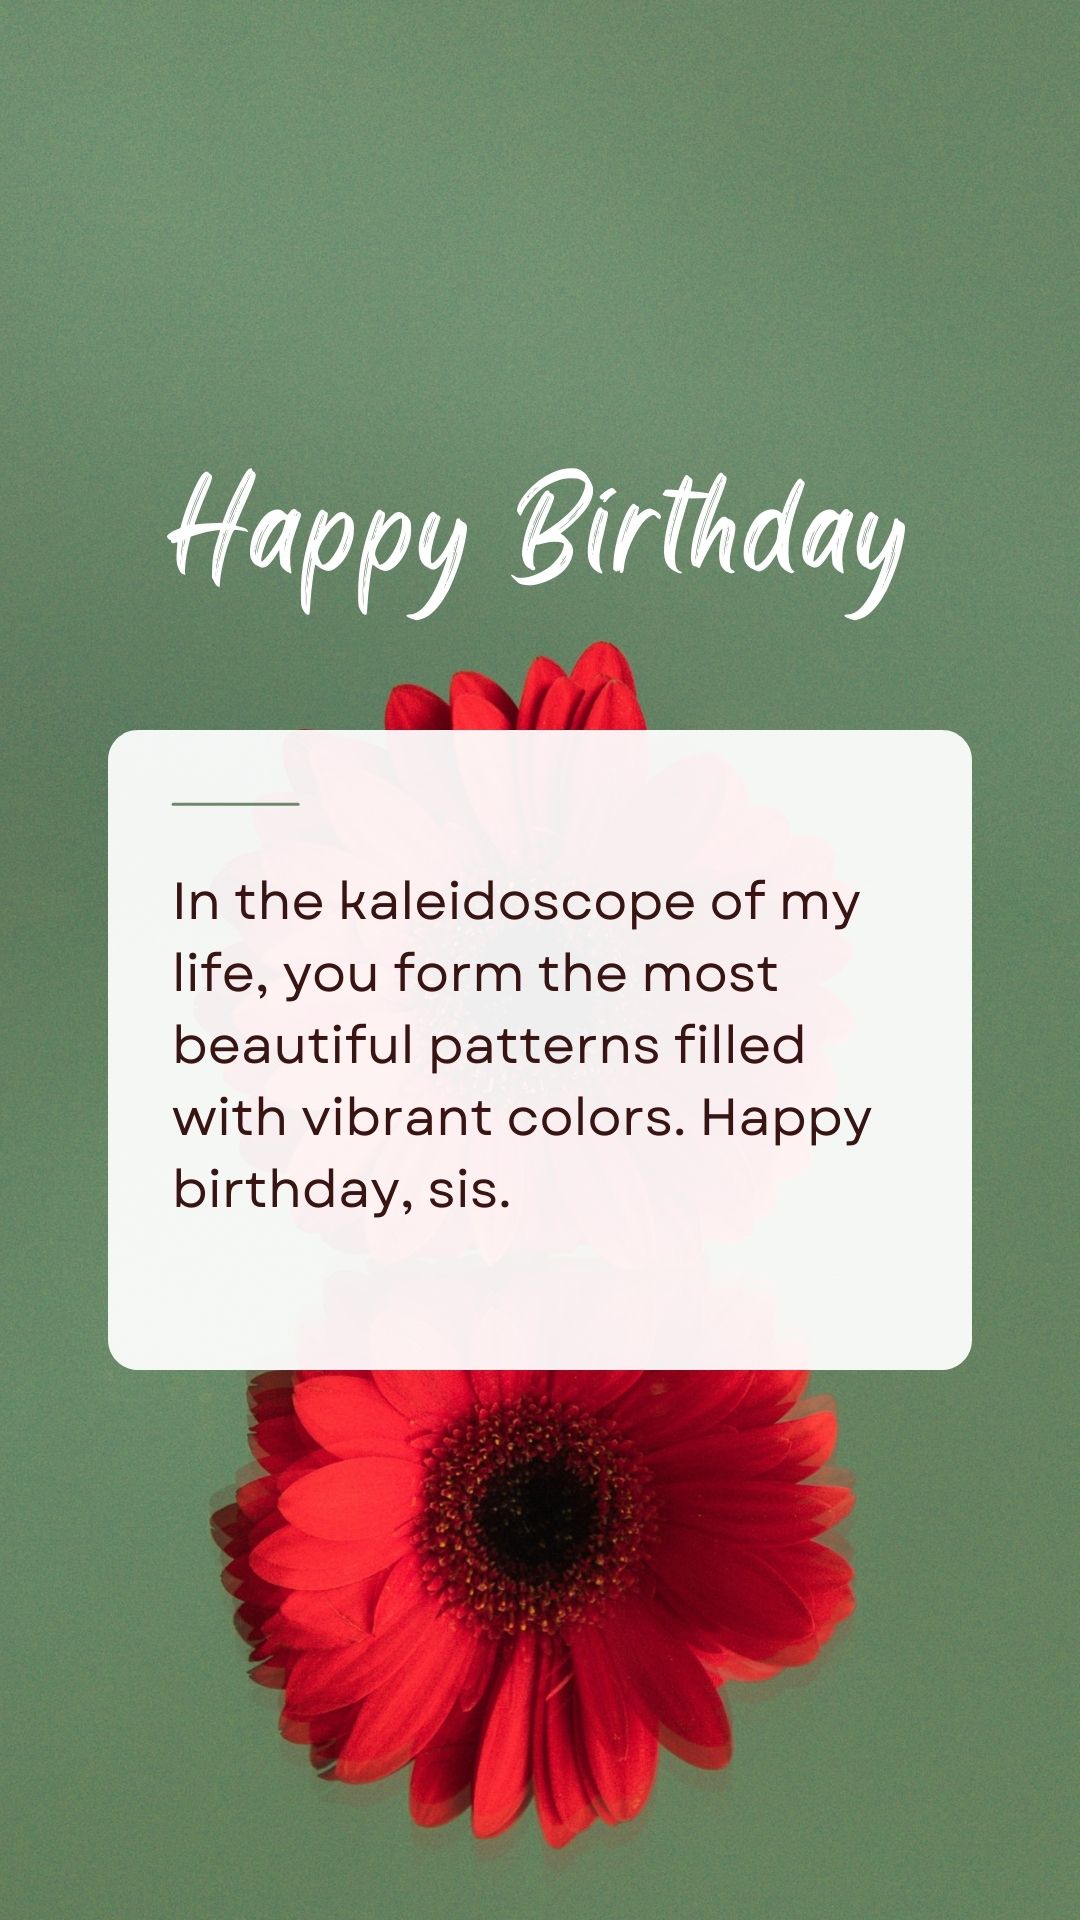 green red flower birthday images sister wishes download